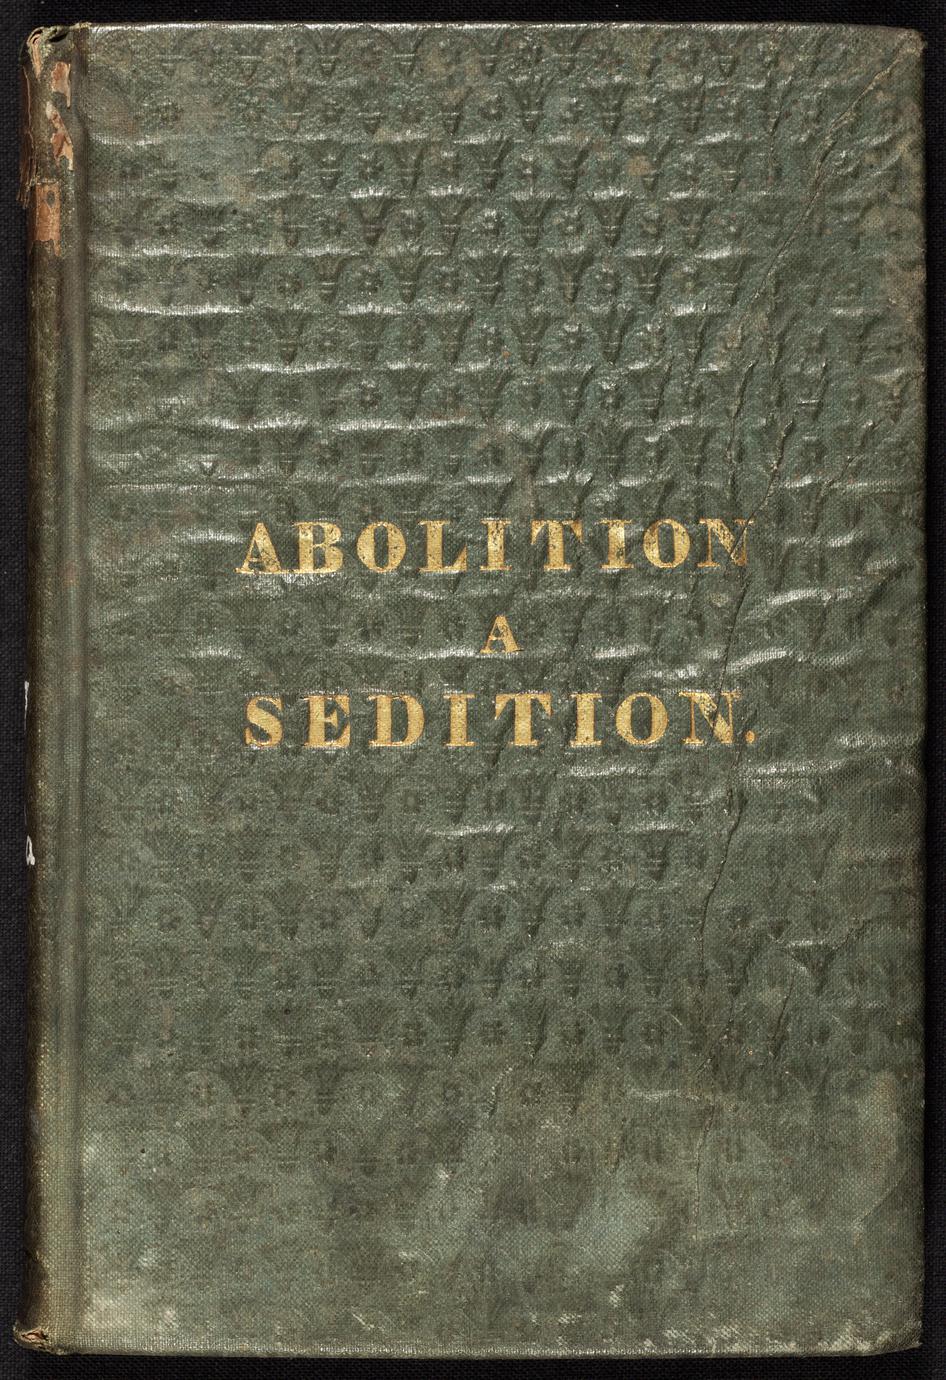 Abolition a sedition (1 of 2)